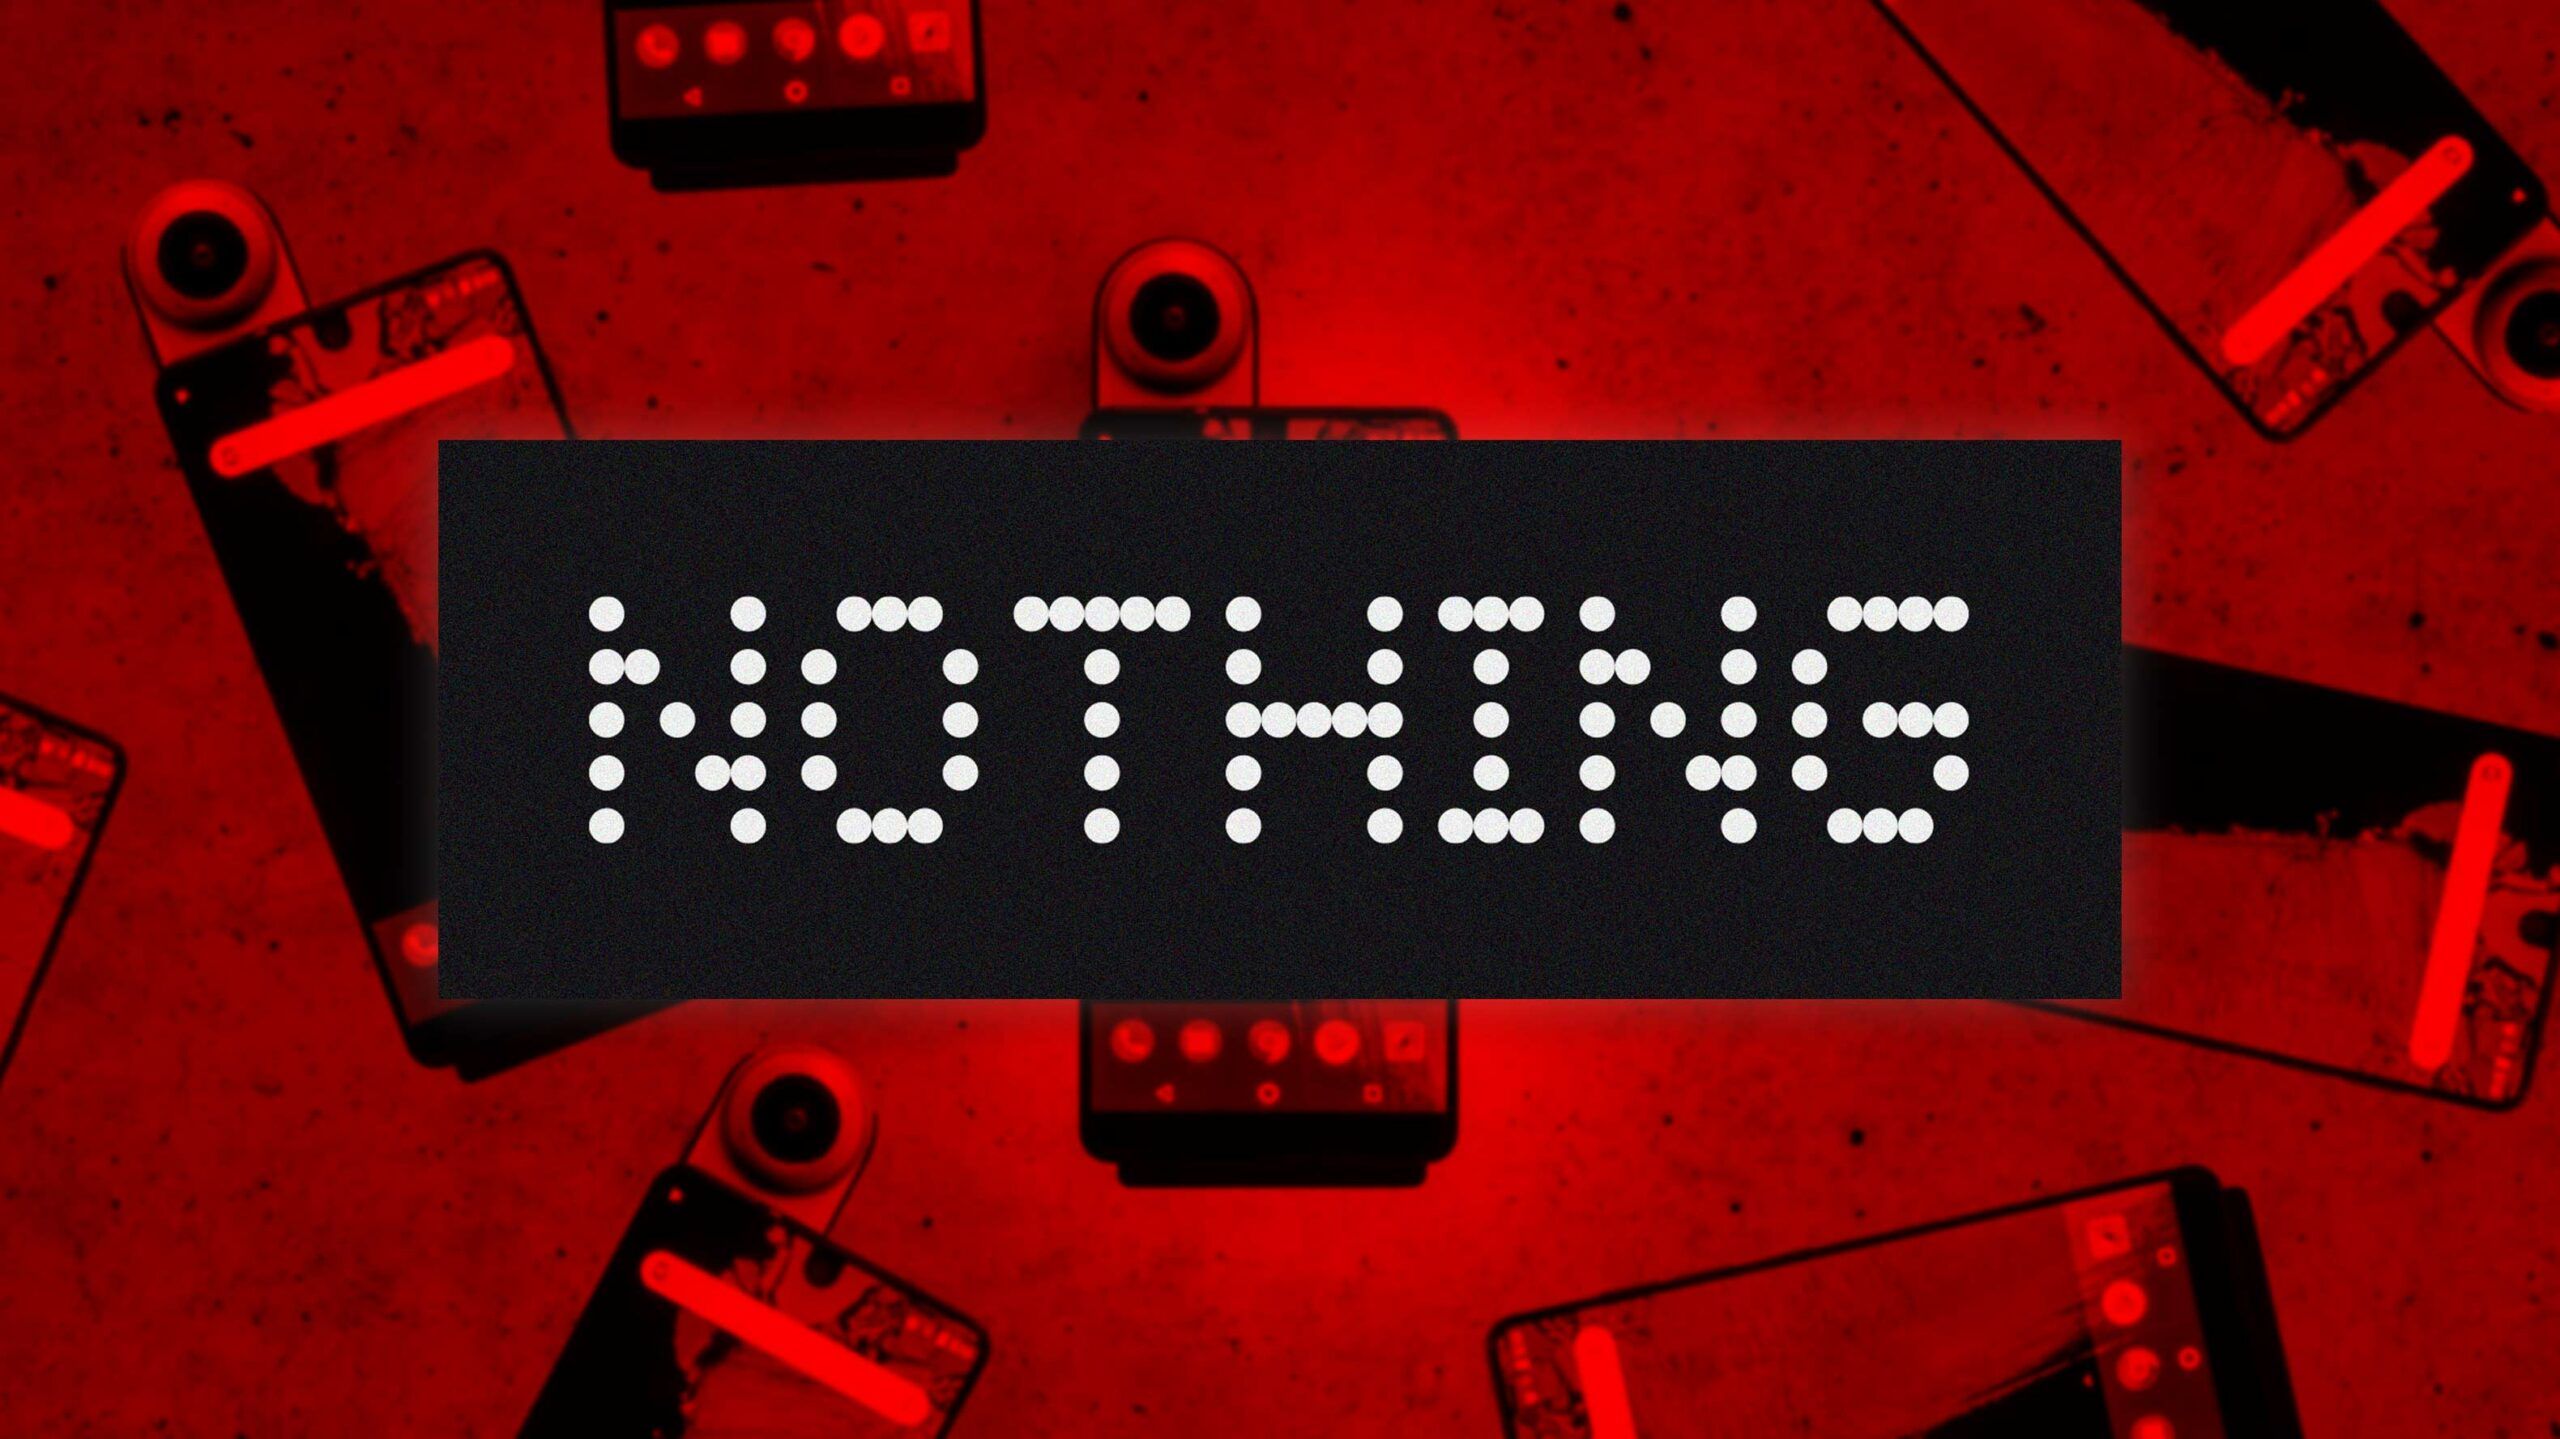 Why is every tech tycoon joining this mystery brand 'Nothing tech'?